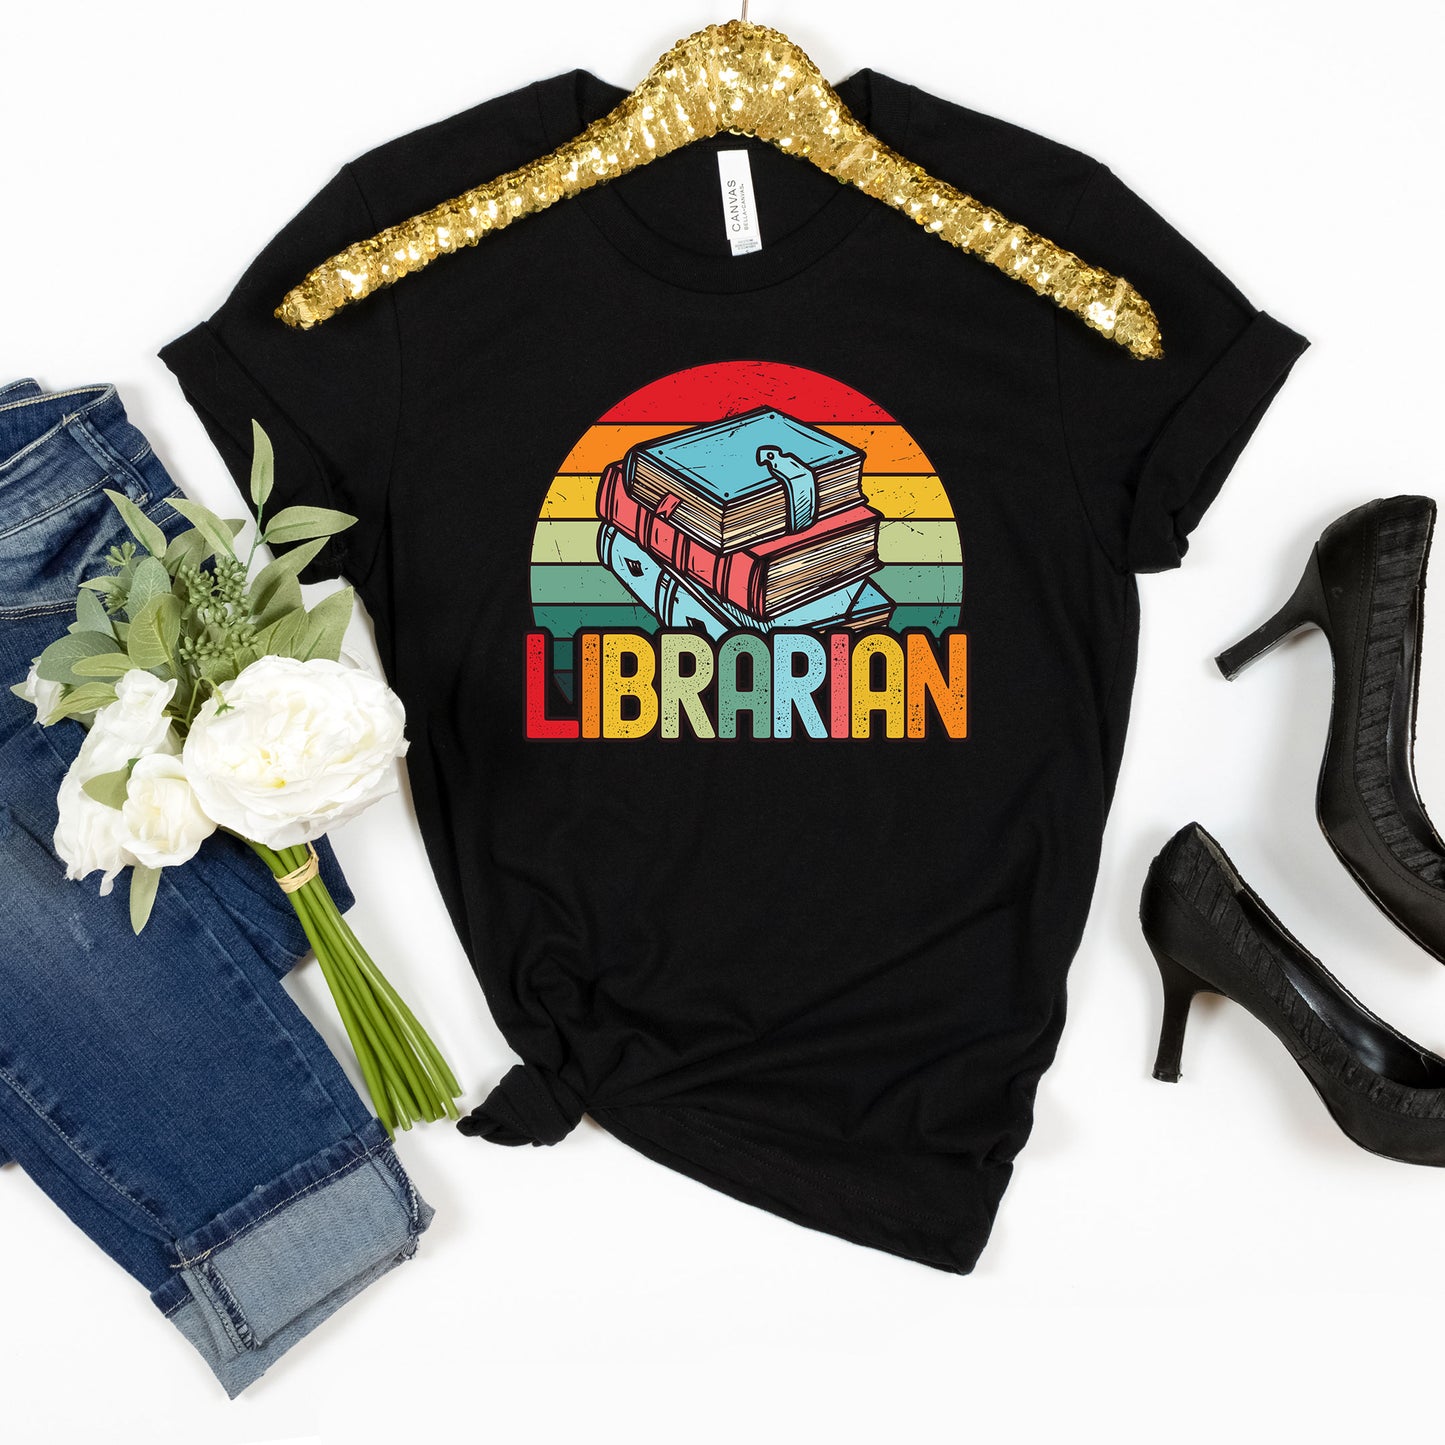 Librarian Shirt, Book Lover T-shirt, Sunset Retro Vintage Tee, Gift For Librarian, Library Book Reader Shirt, Reading Book Lover Nerd Shirt